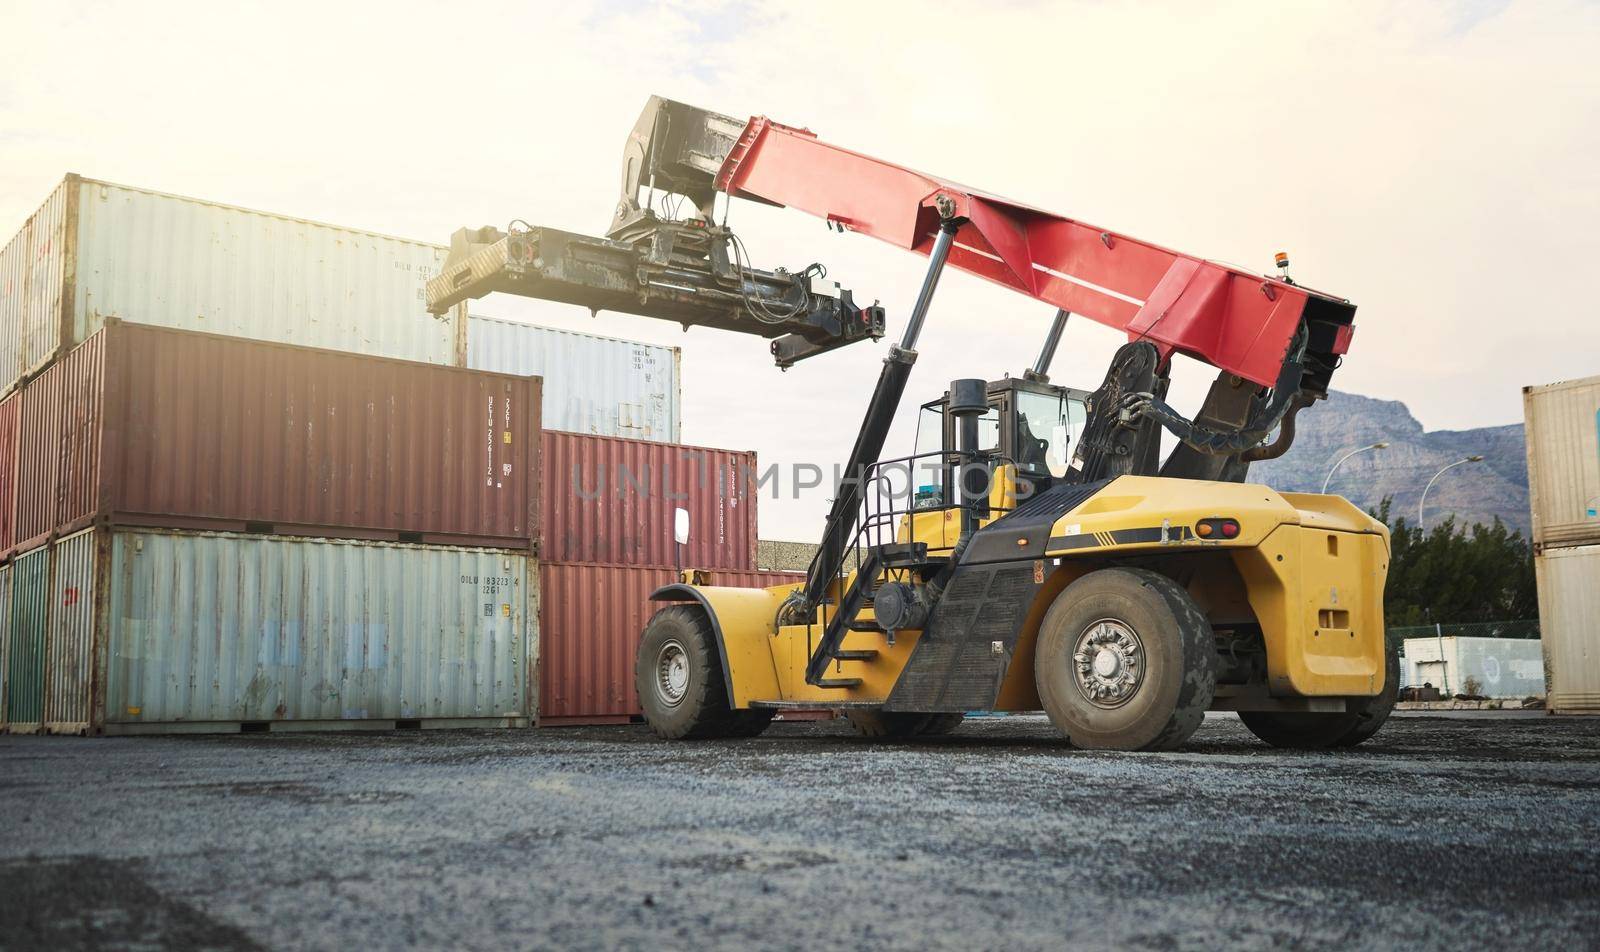 Shipping container, logistics crane truck and supply chain distribution port in freight export industry. Industrial site with transportation for storage, delivery loading and global ecommerce work by YuriArcurs